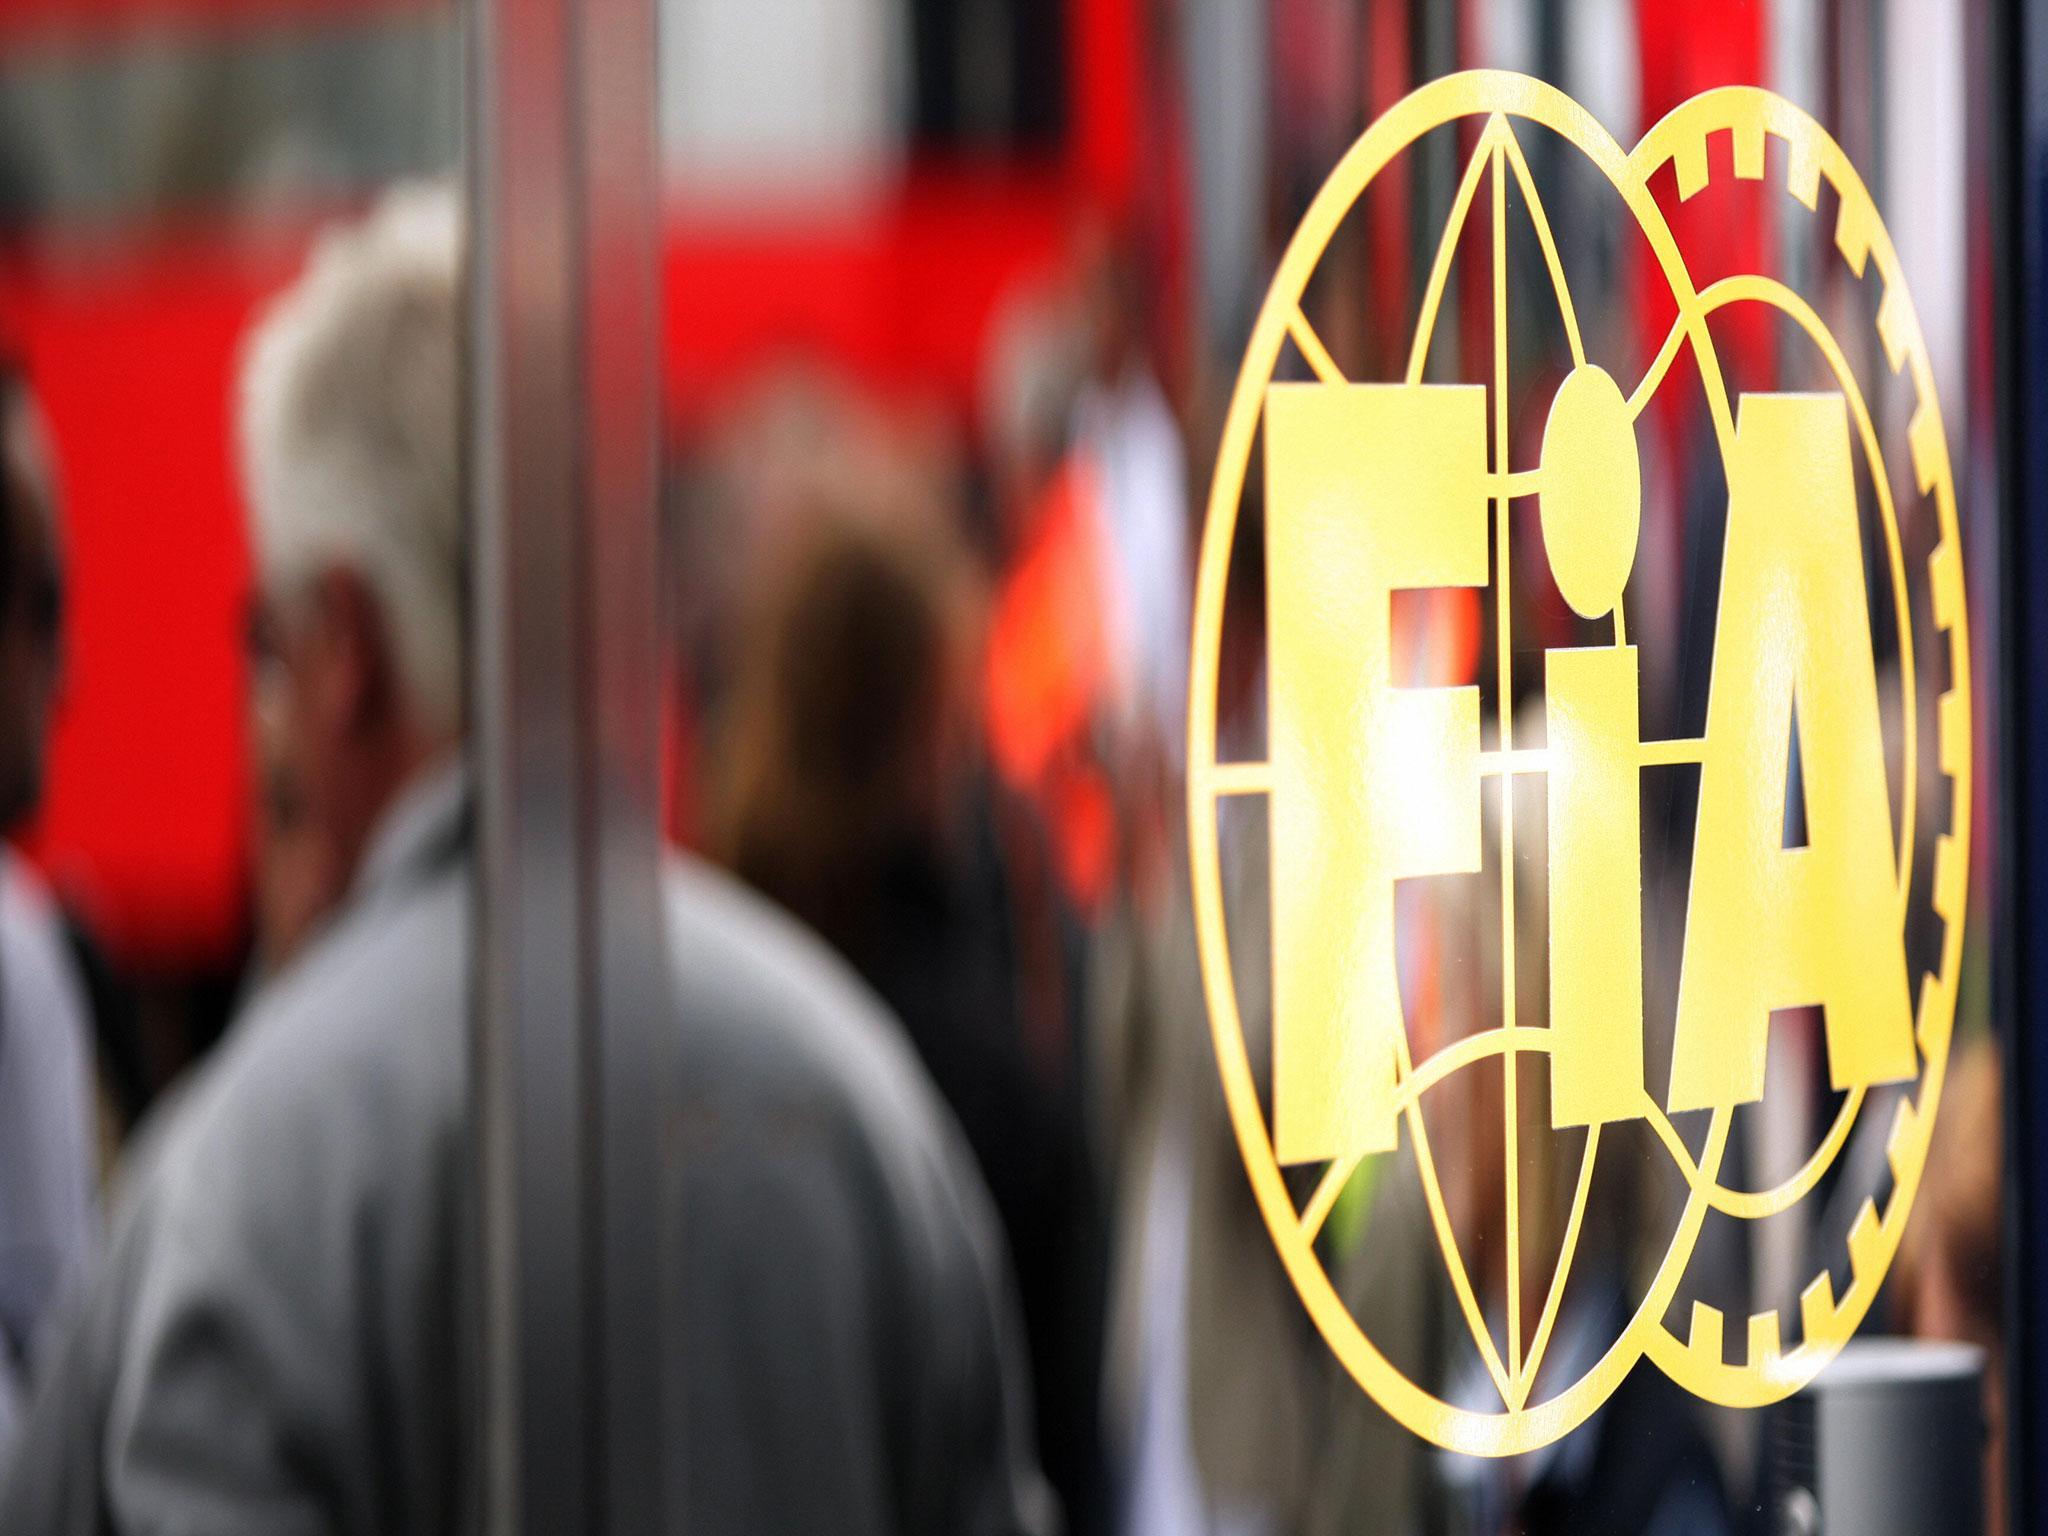 The FIA have been told to take measures to combat corruption